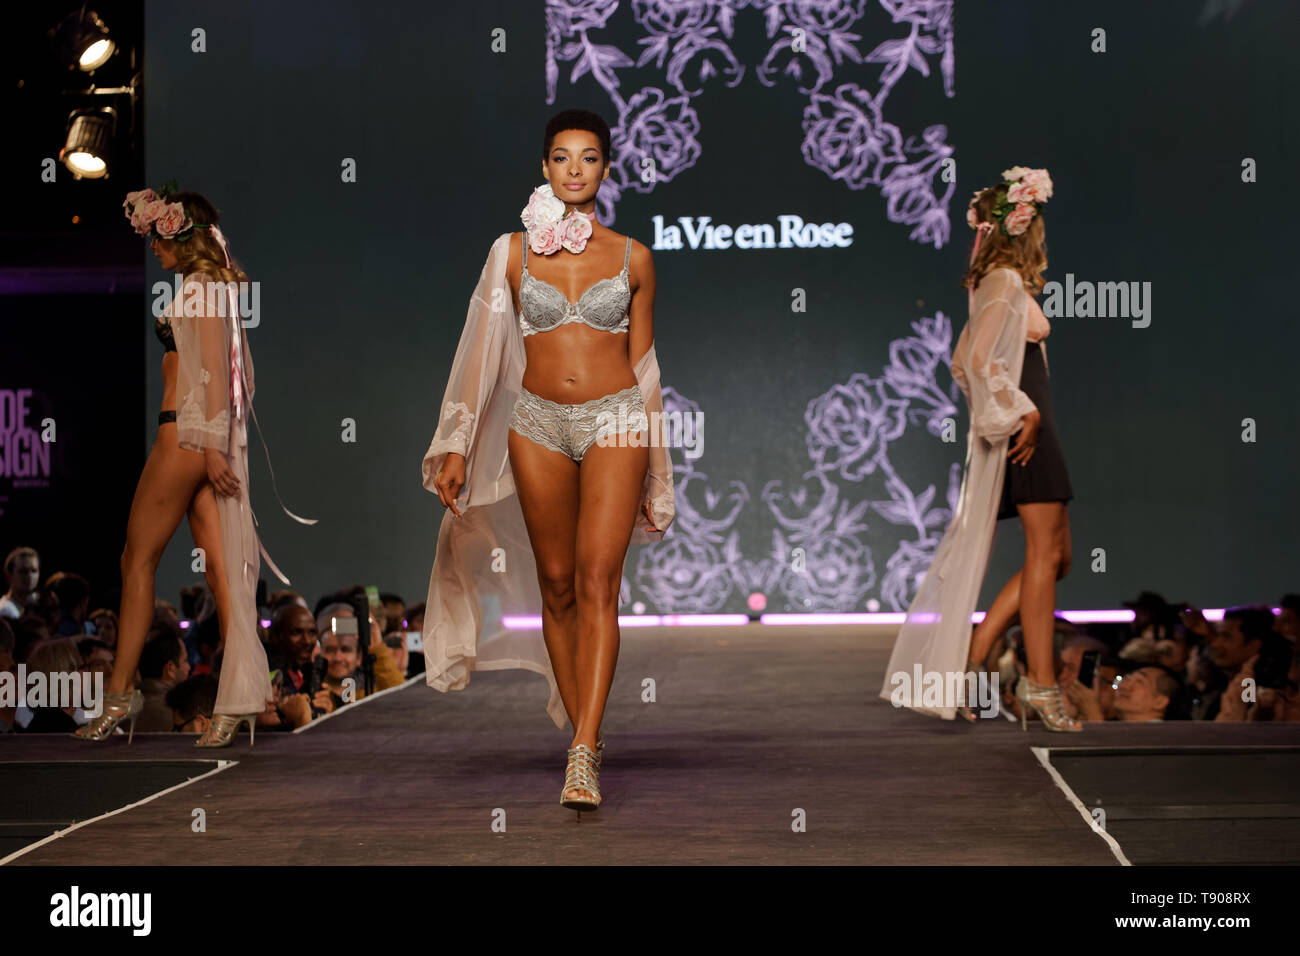 Montreal,Canada. A model poses on the runway at the La Vie en Rose fashion show held during the Fashion and Design Festival. Stock Photo